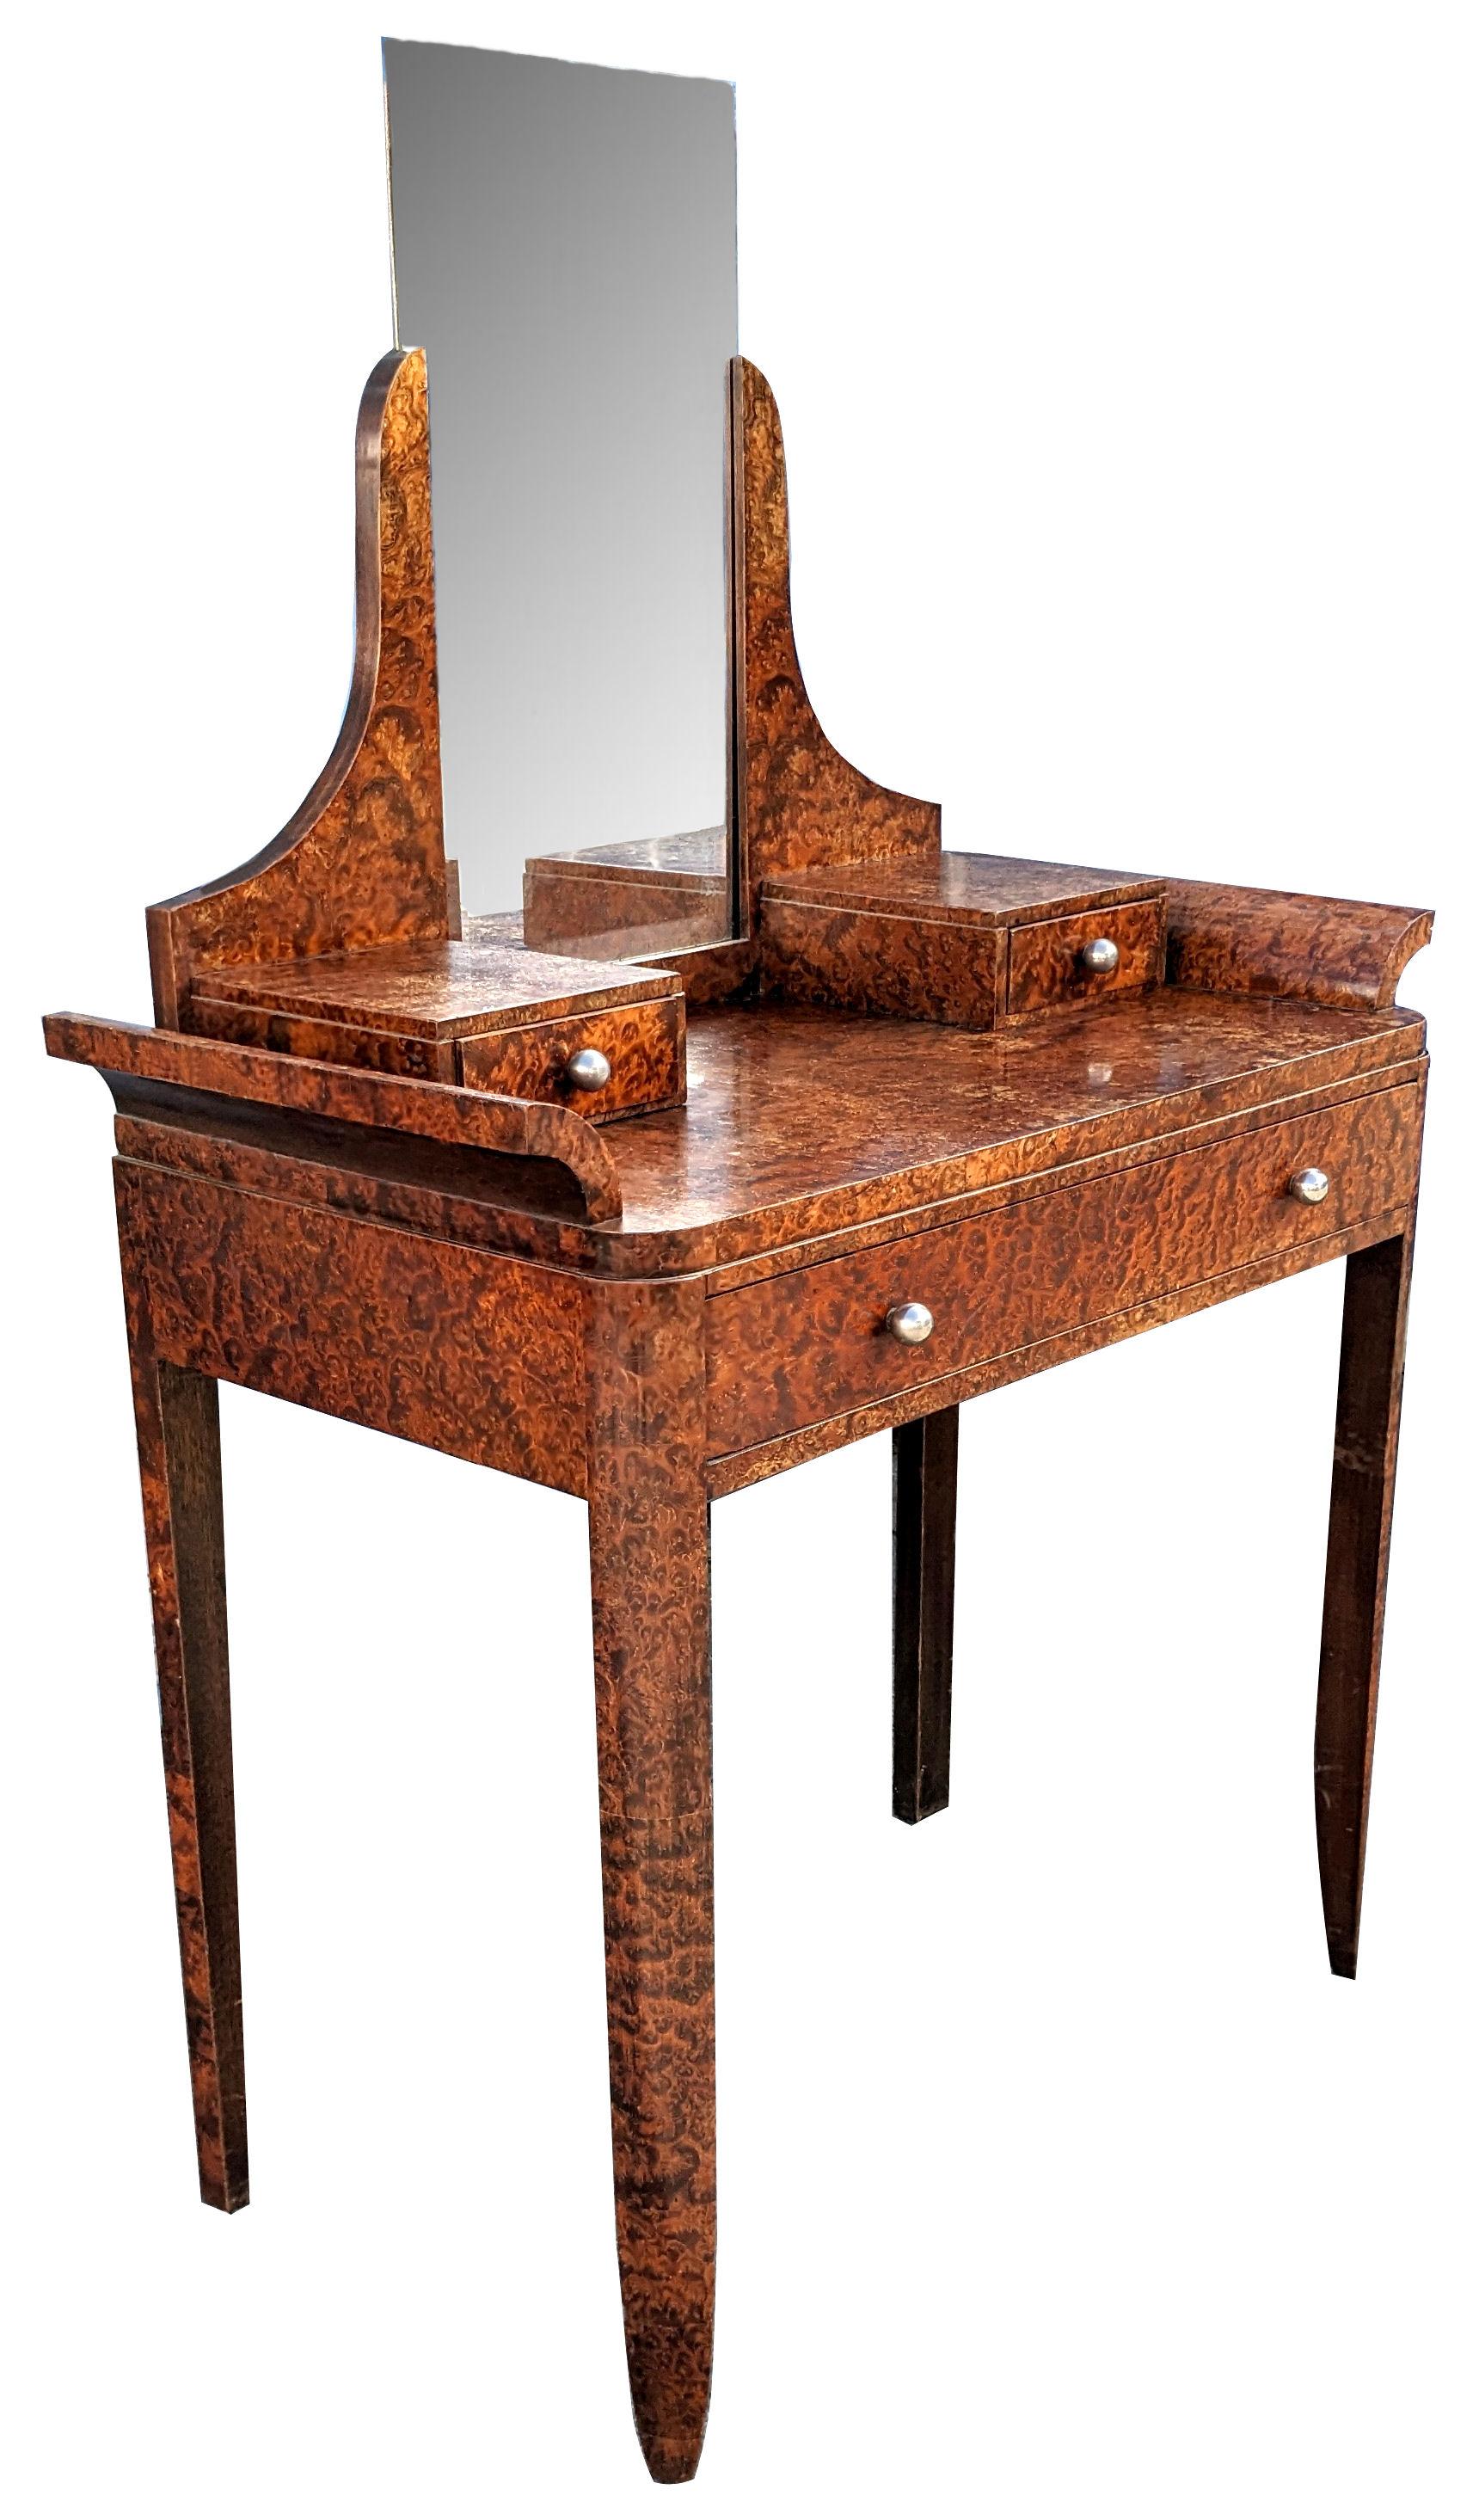 For your consideration is this original 1930s Art Deco Walnut dressing table. Originating from France and oozing everything about this wonderful bygone era we've all come to love and admire, this dressing table is one not to be missed! Veneered in a